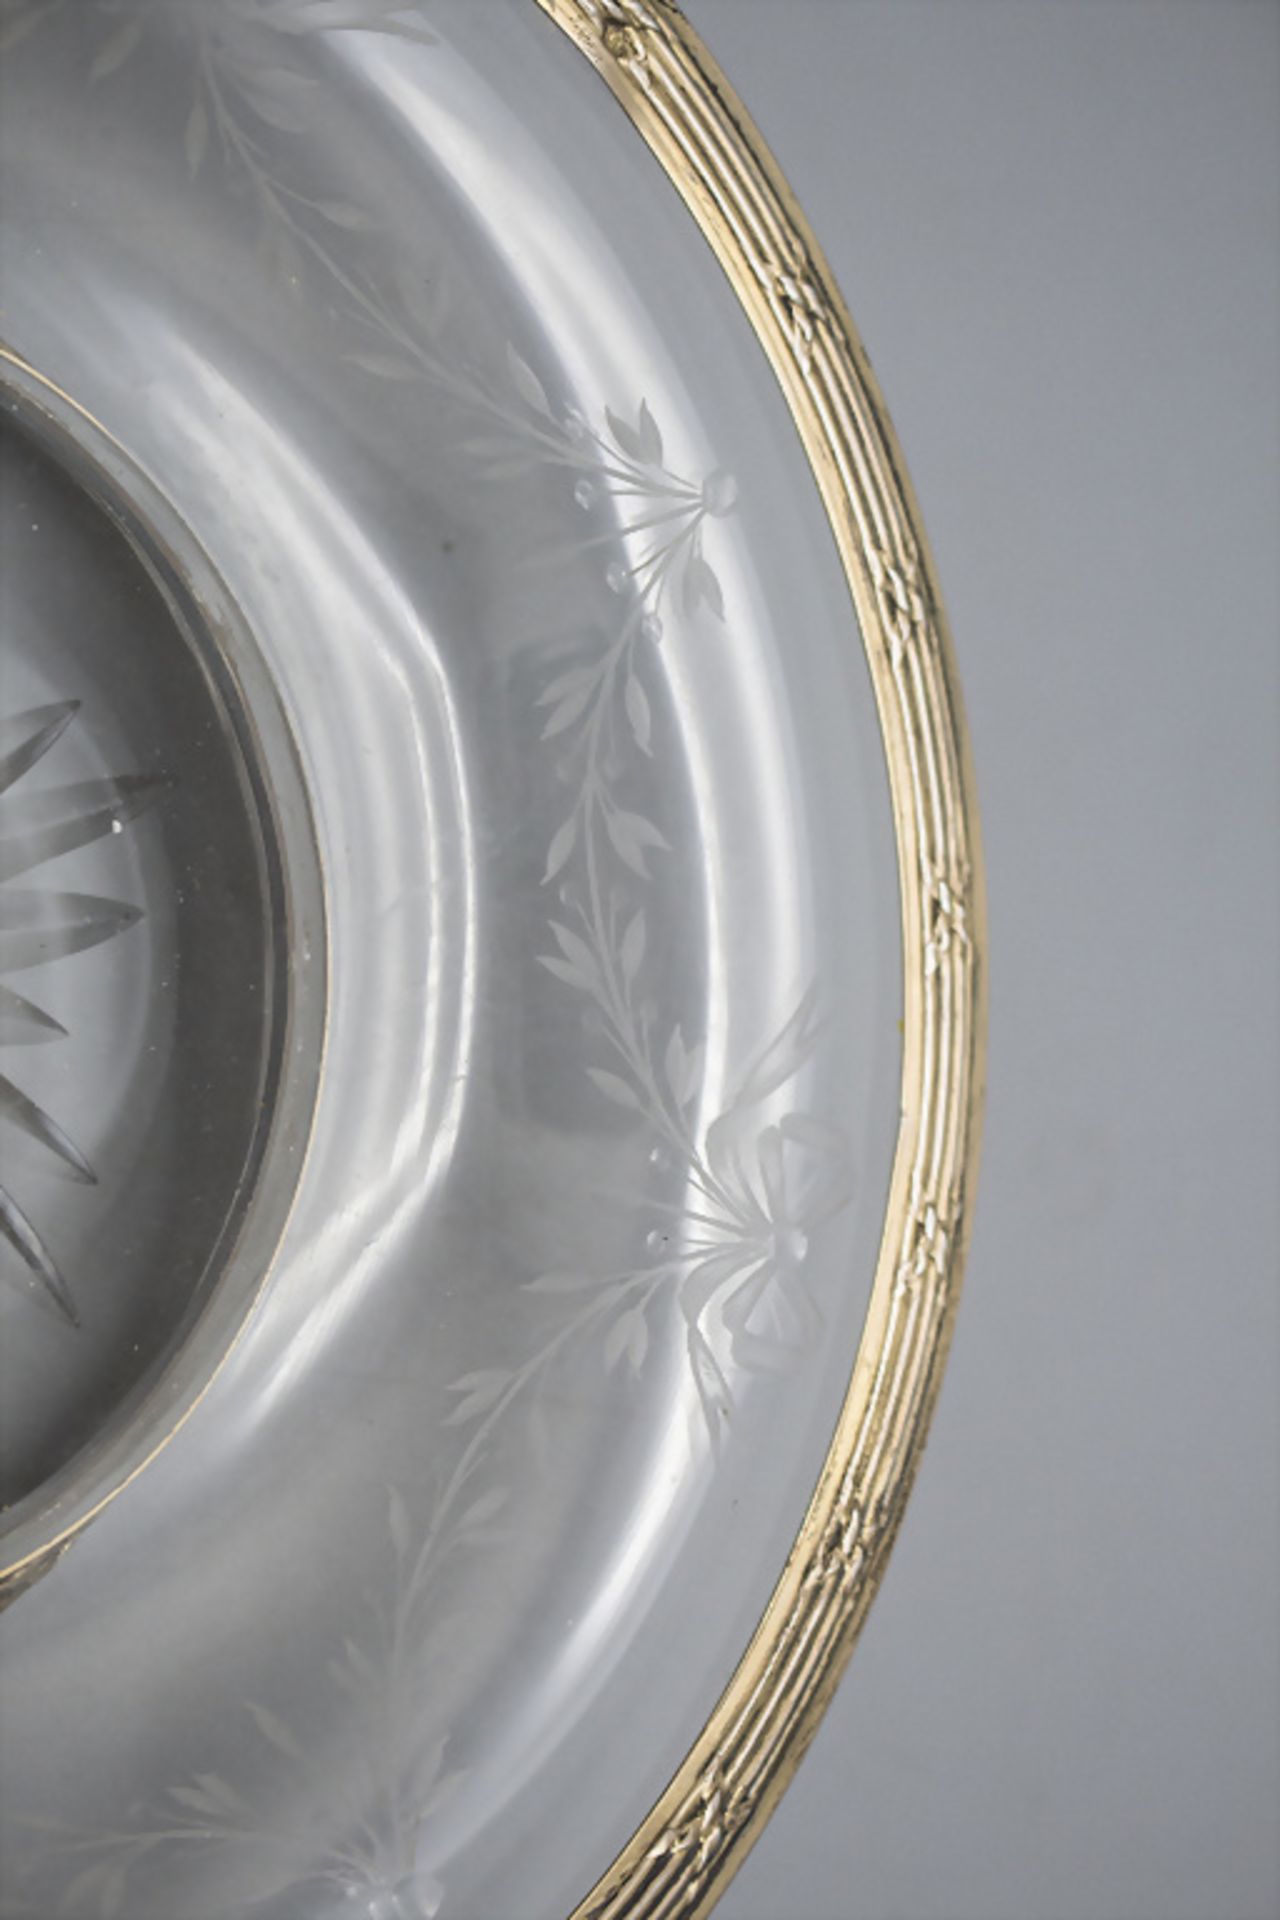 Paar Tazza / A pair of silver Tazza, Langriffoul & Laval, Paris, um 1910 - Image 3 of 6